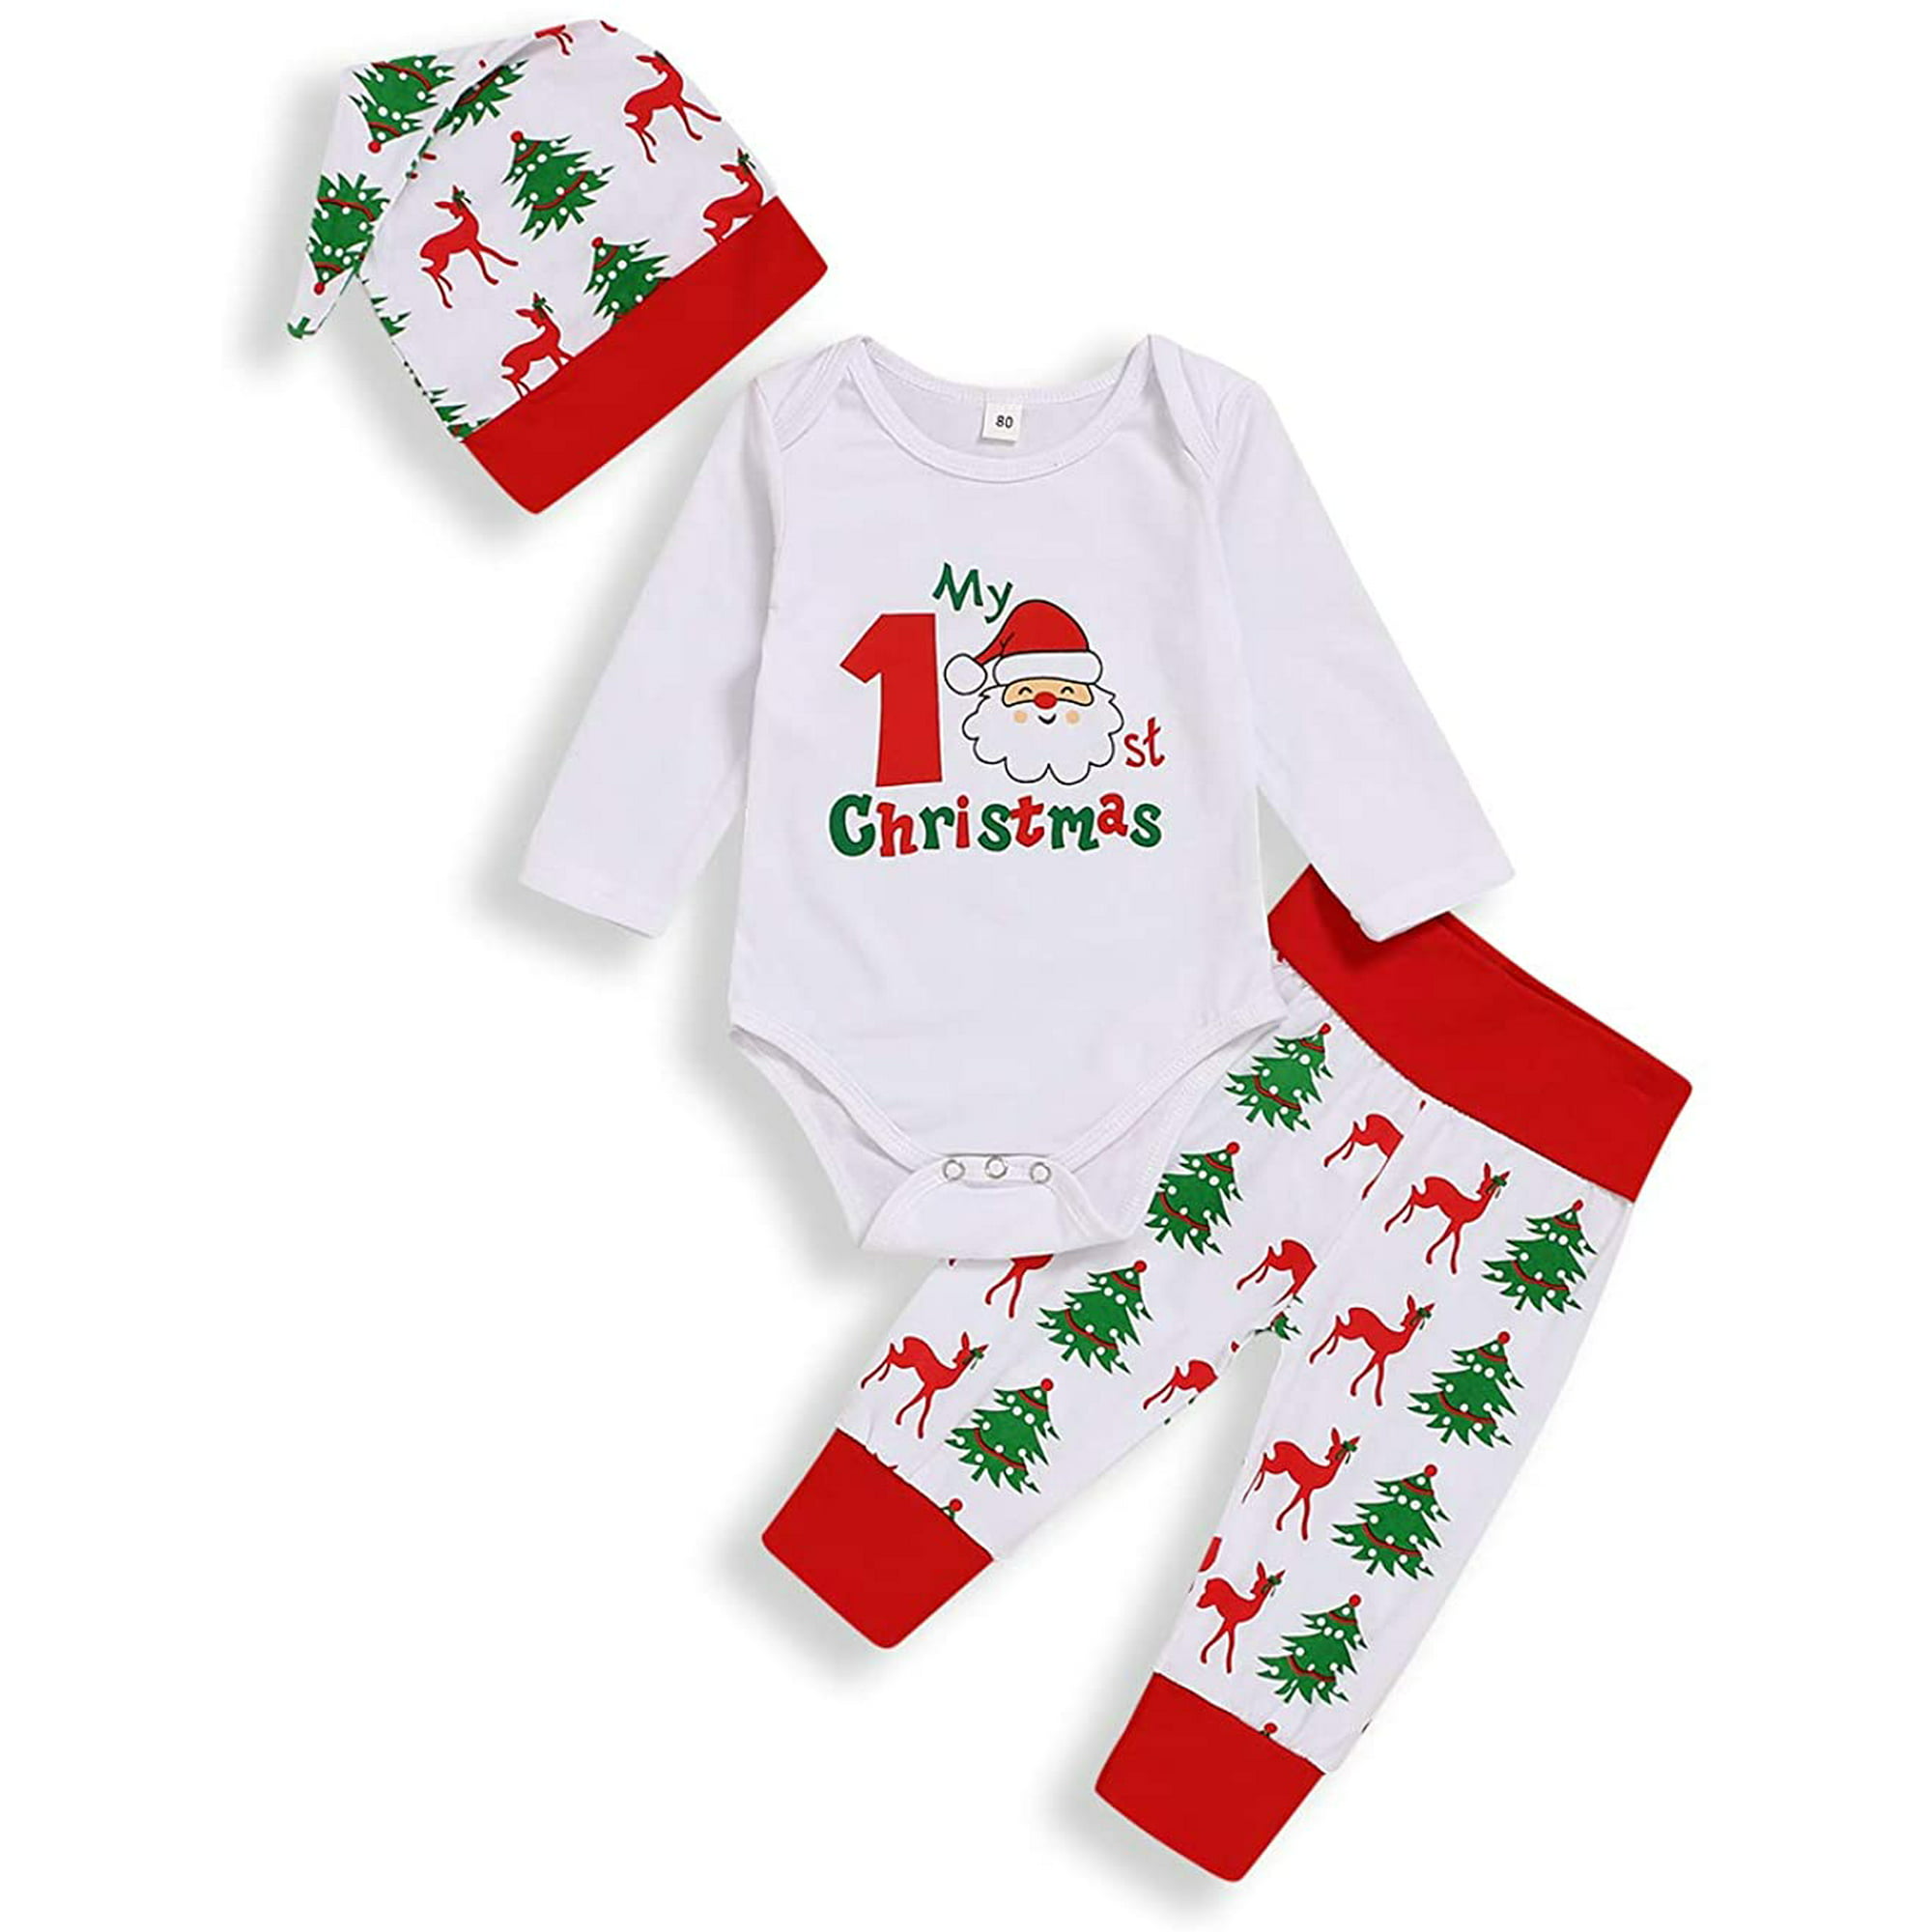 My First Christmas Outfit Newborn Baby Boys Girls Rompers +Pant +